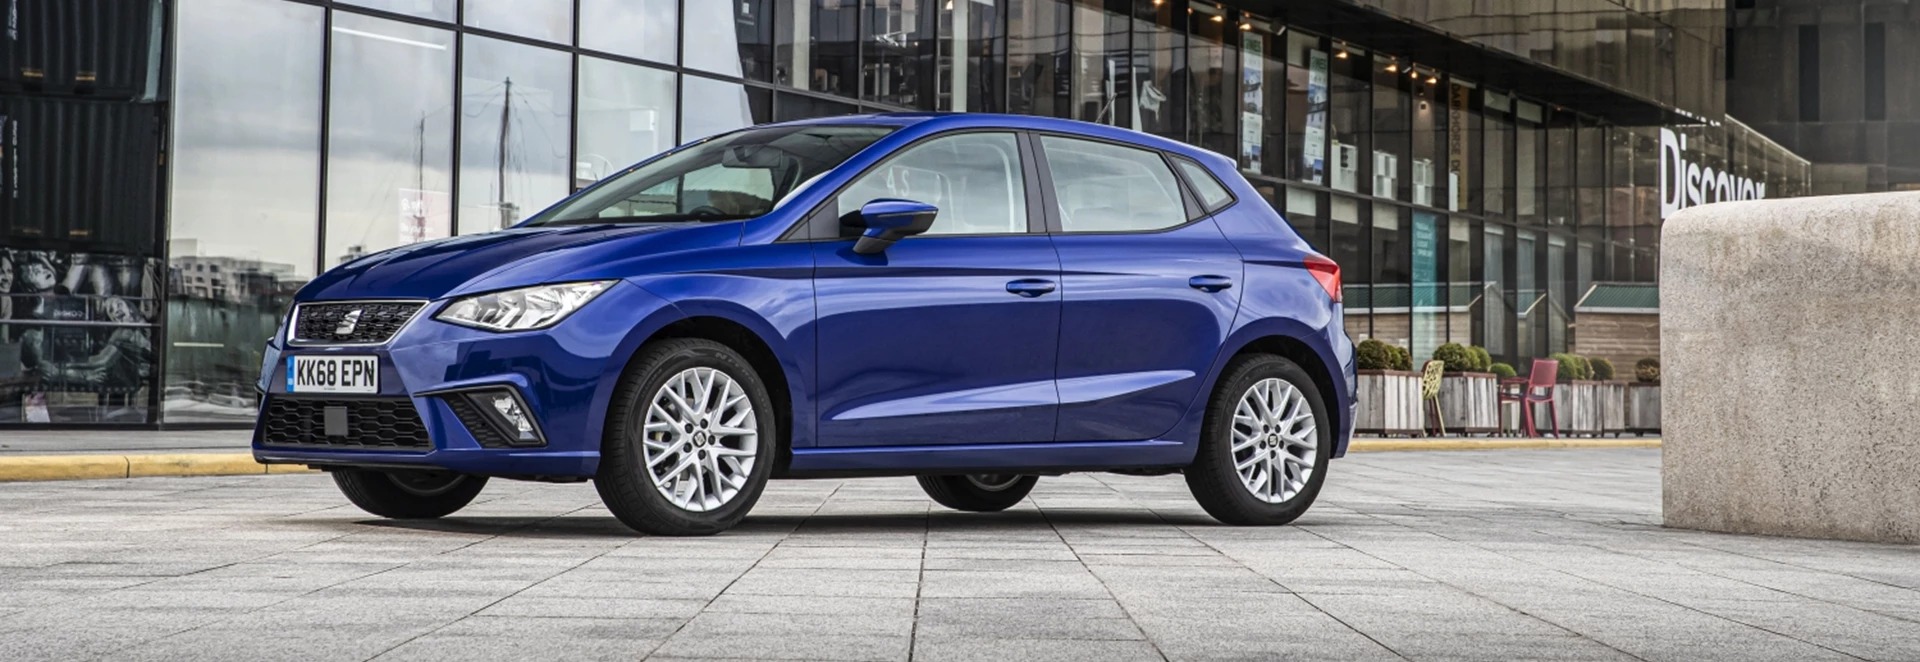 5 reasons why the Seat Ibiza should be on your small car shopping list 